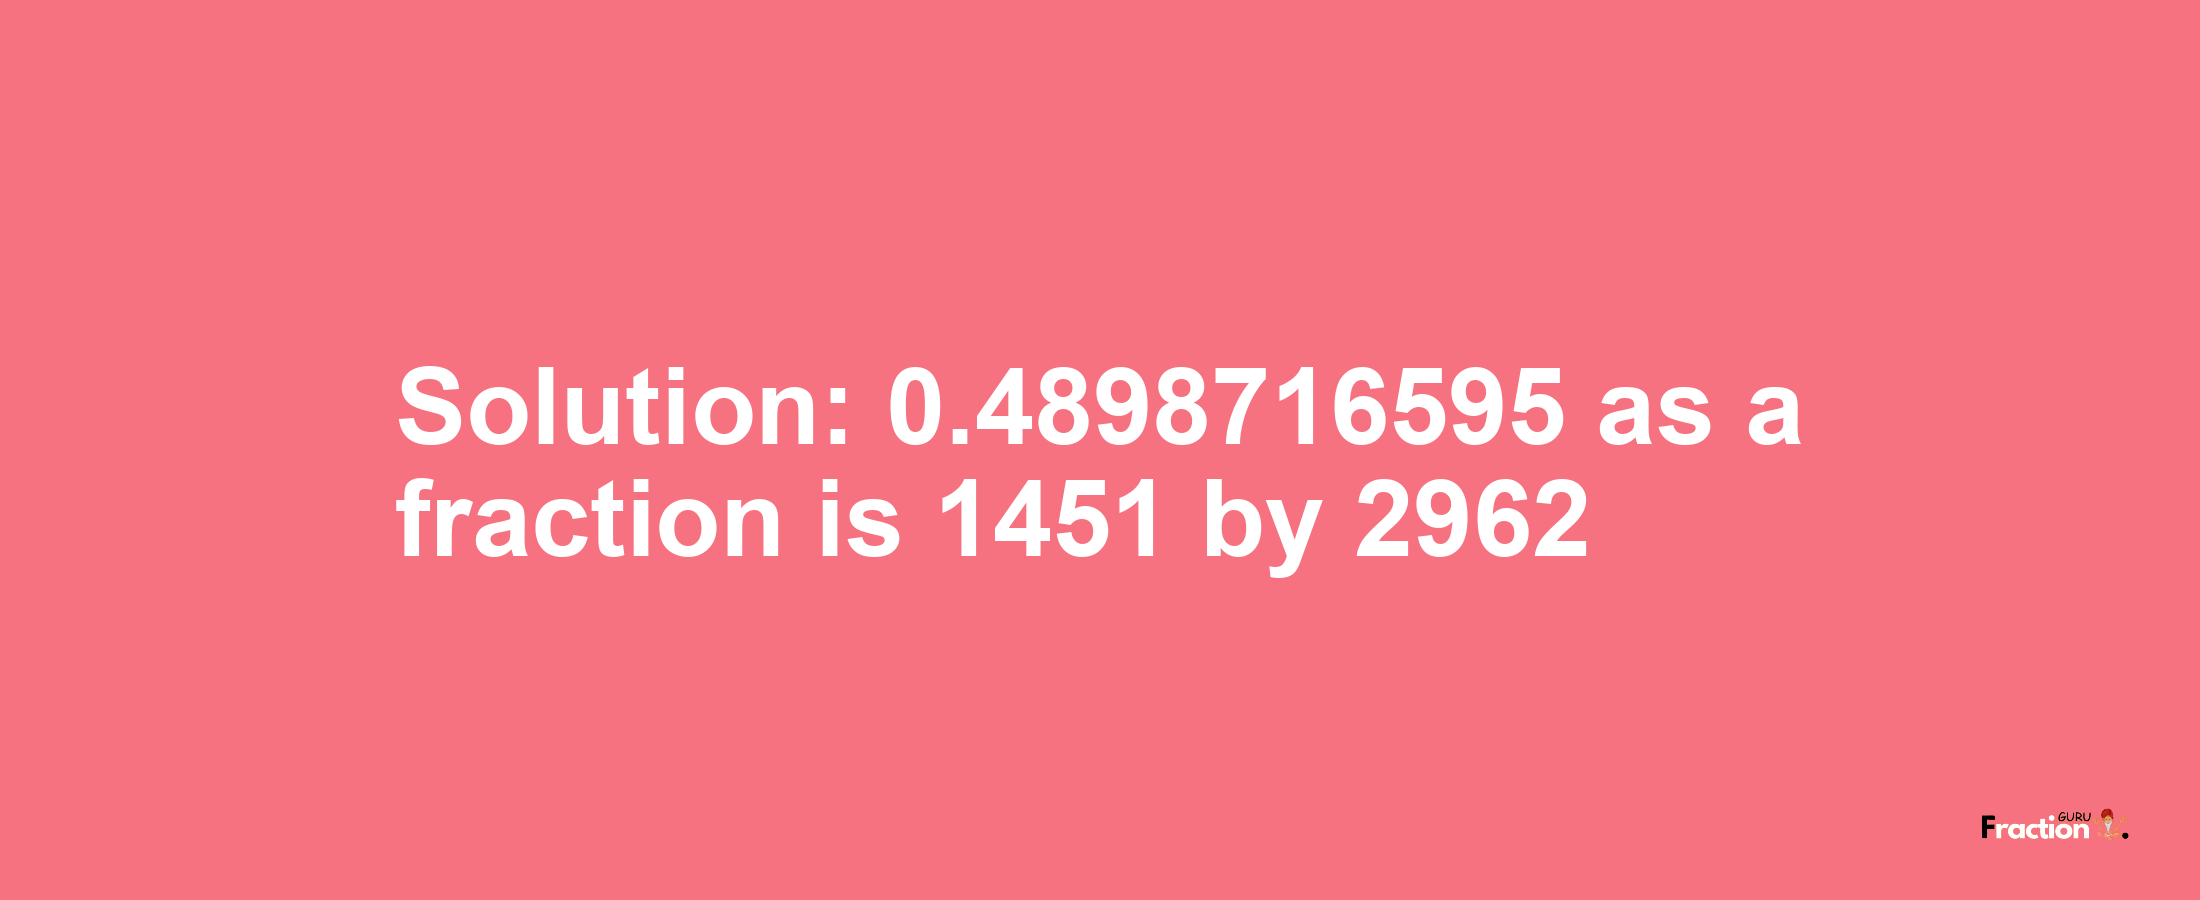 Solution:0.4898716595 as a fraction is 1451/2962